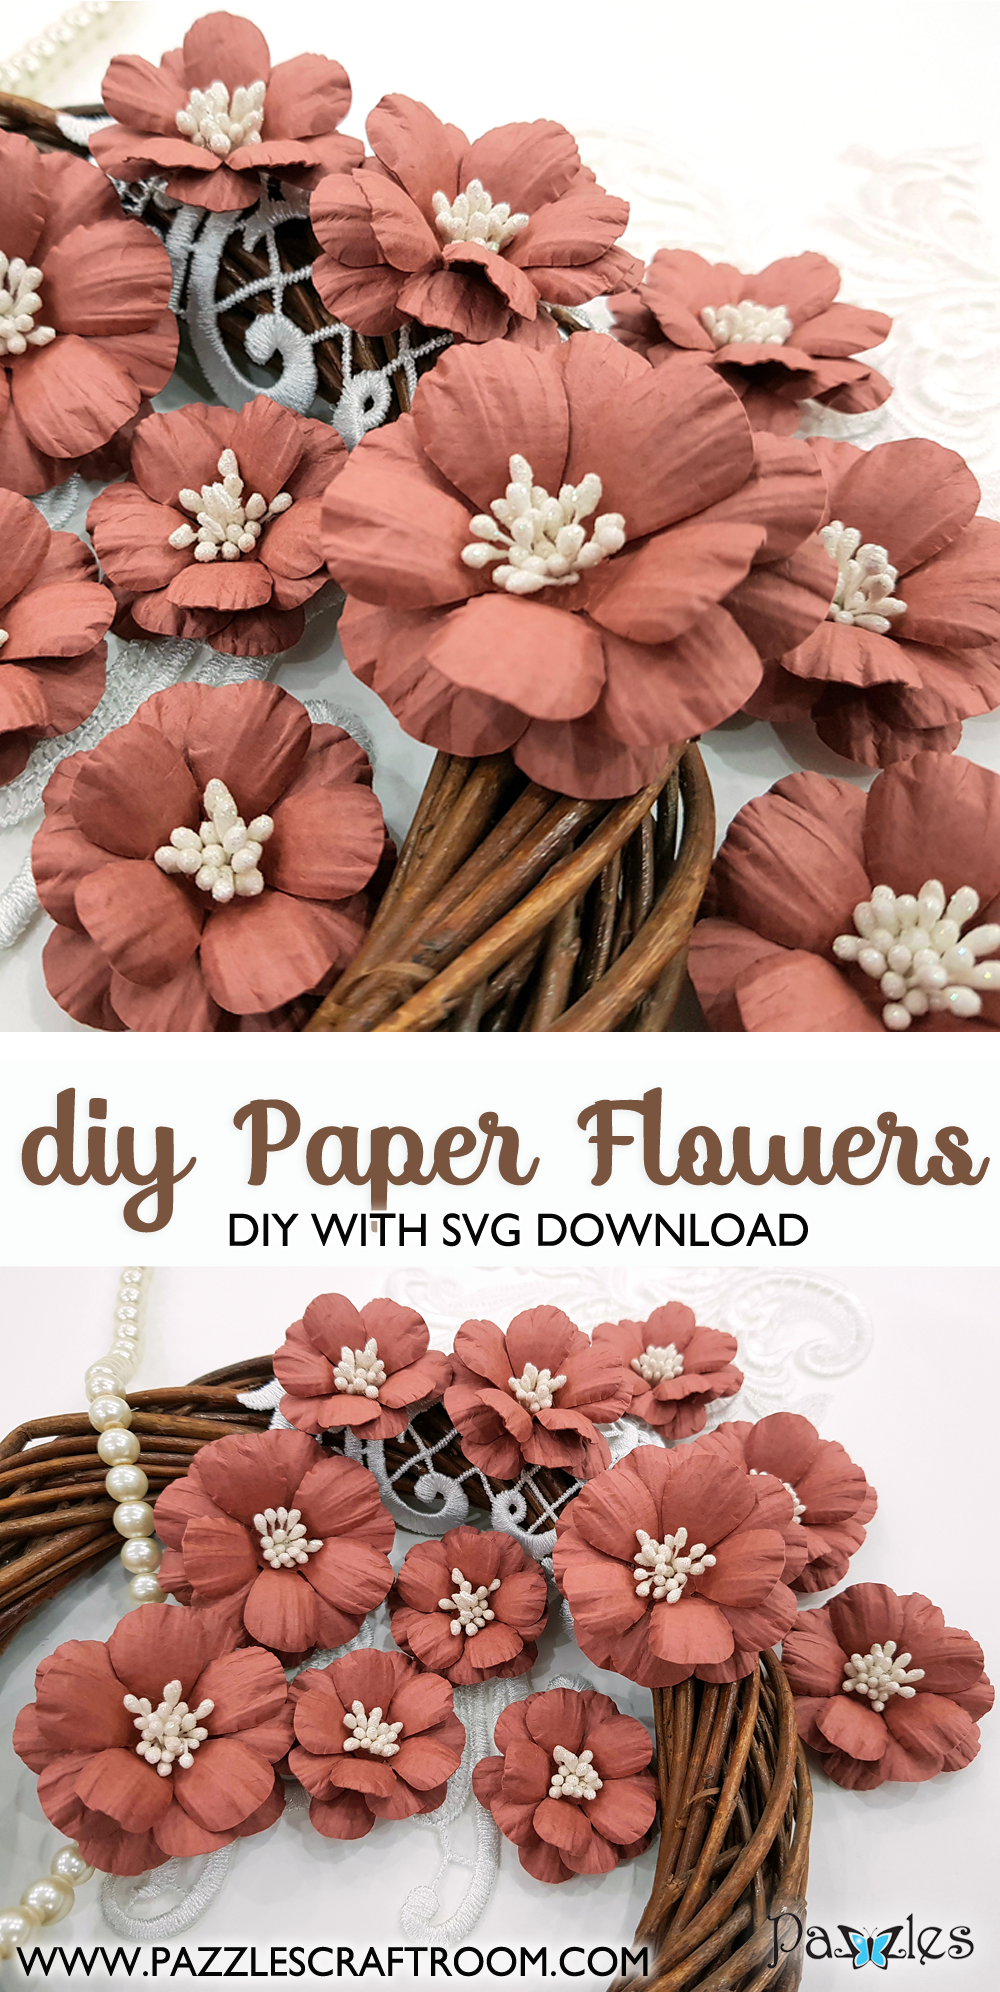 Pazzles DIY Beautiful Paper Flowers with instant SVG download. Instant SVG download compatible with all major electronic cutters including Pazzles Inspiration, Cricut, and Silhouette Cameo. Design by Nida Tanweer.